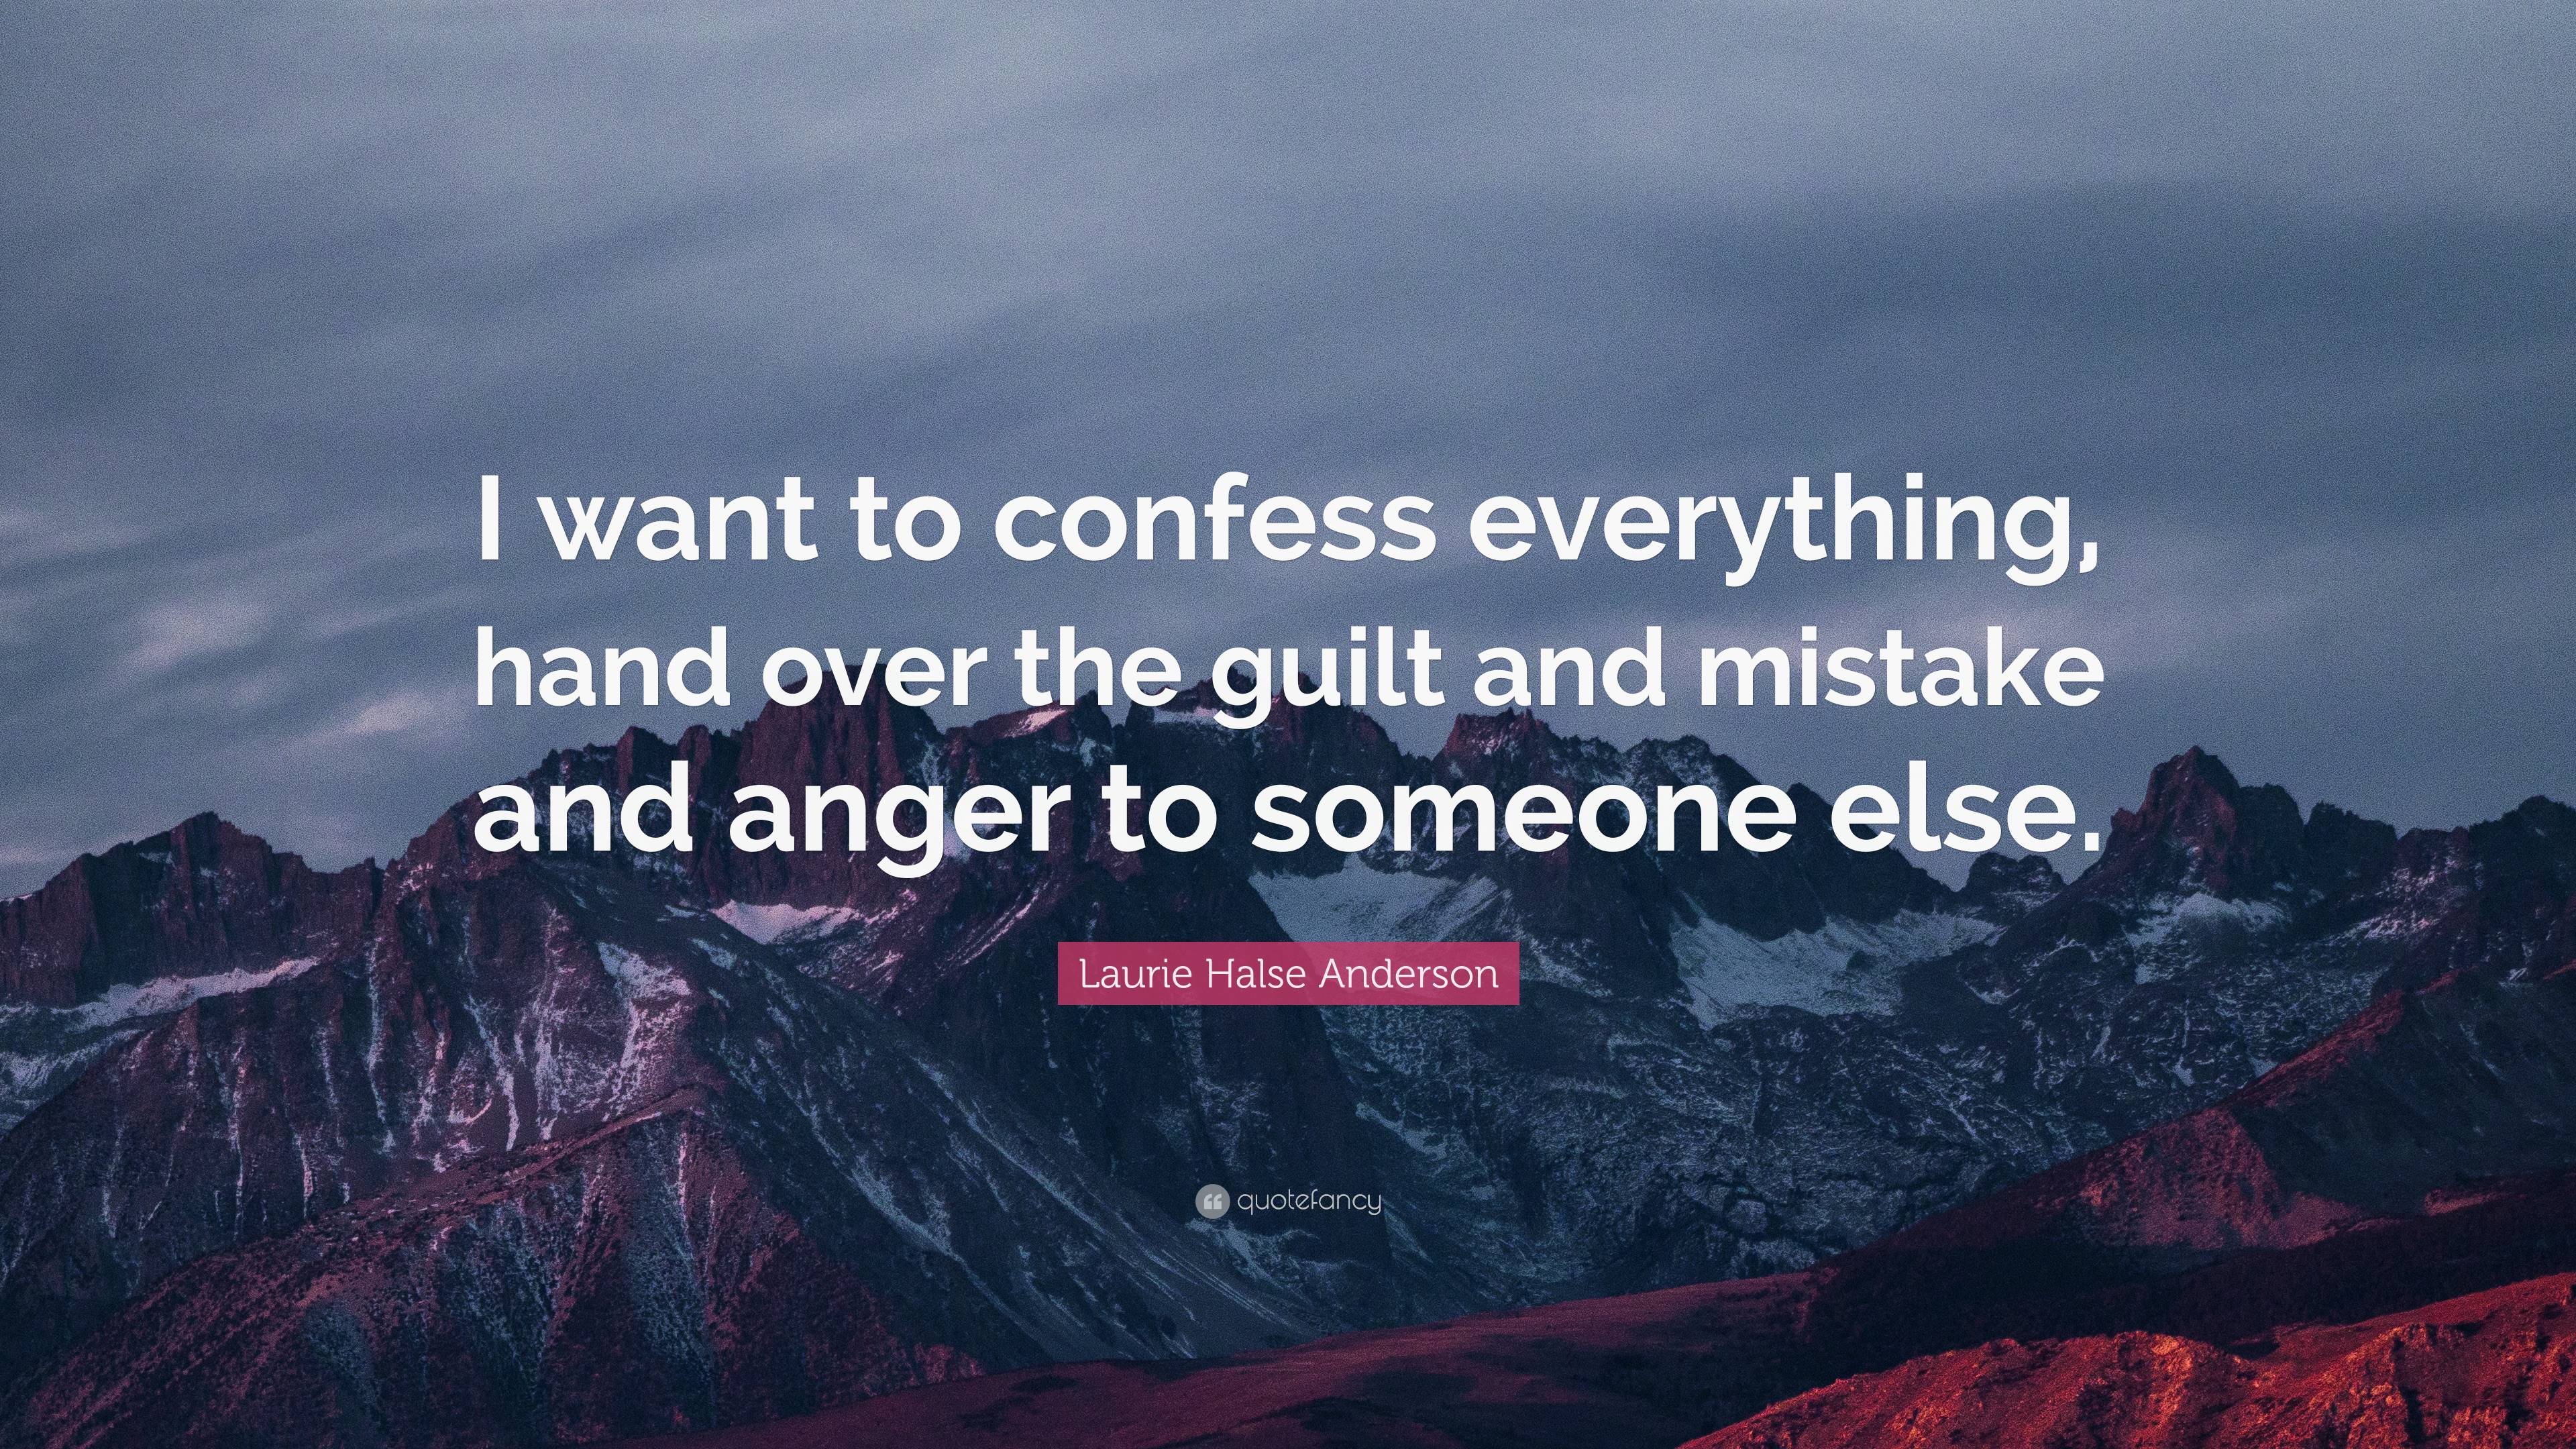 Laurie Halse Anderson Quote: “I want to confess everything, hand over ...